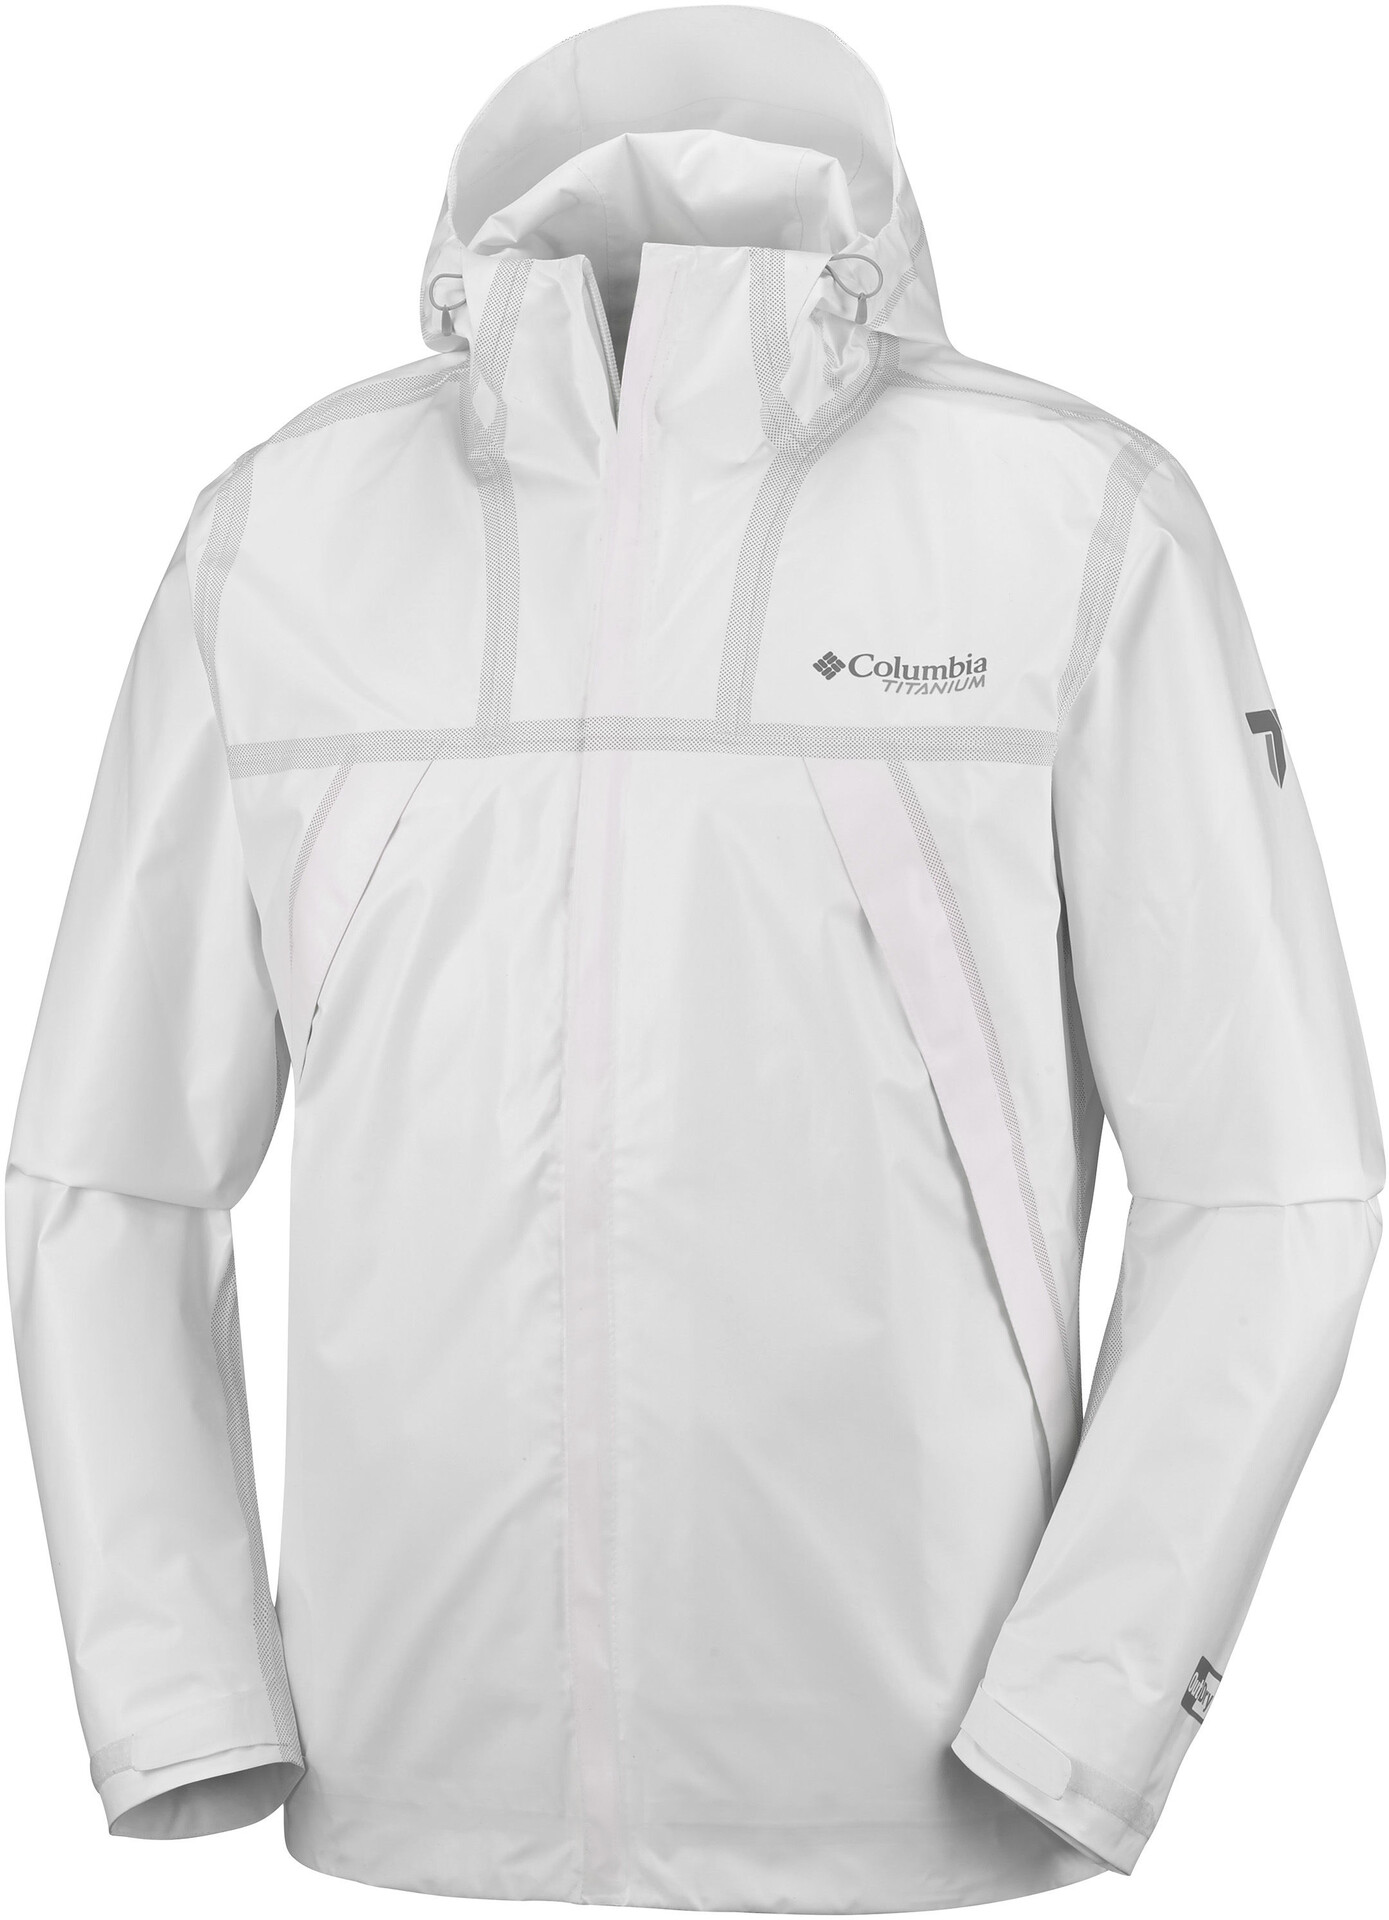 columbia outdry jacket